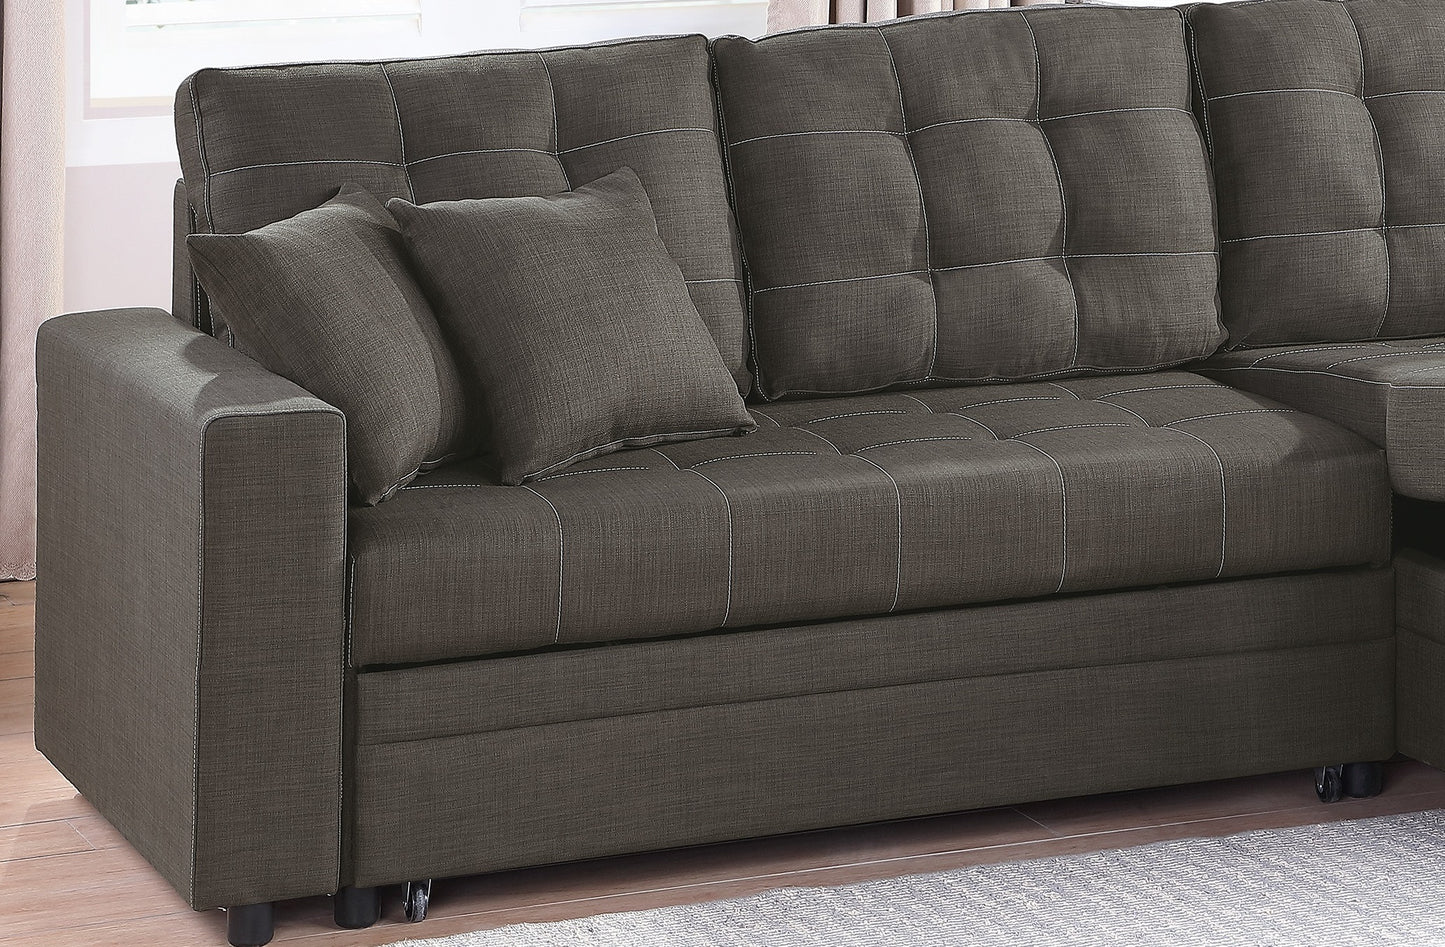 Convertible Sectional Pull Out Bed Sofa Chaise with Reversible Storage, Ash Black Polyfiber Tufted Couch Lounge - Various Sizes Available